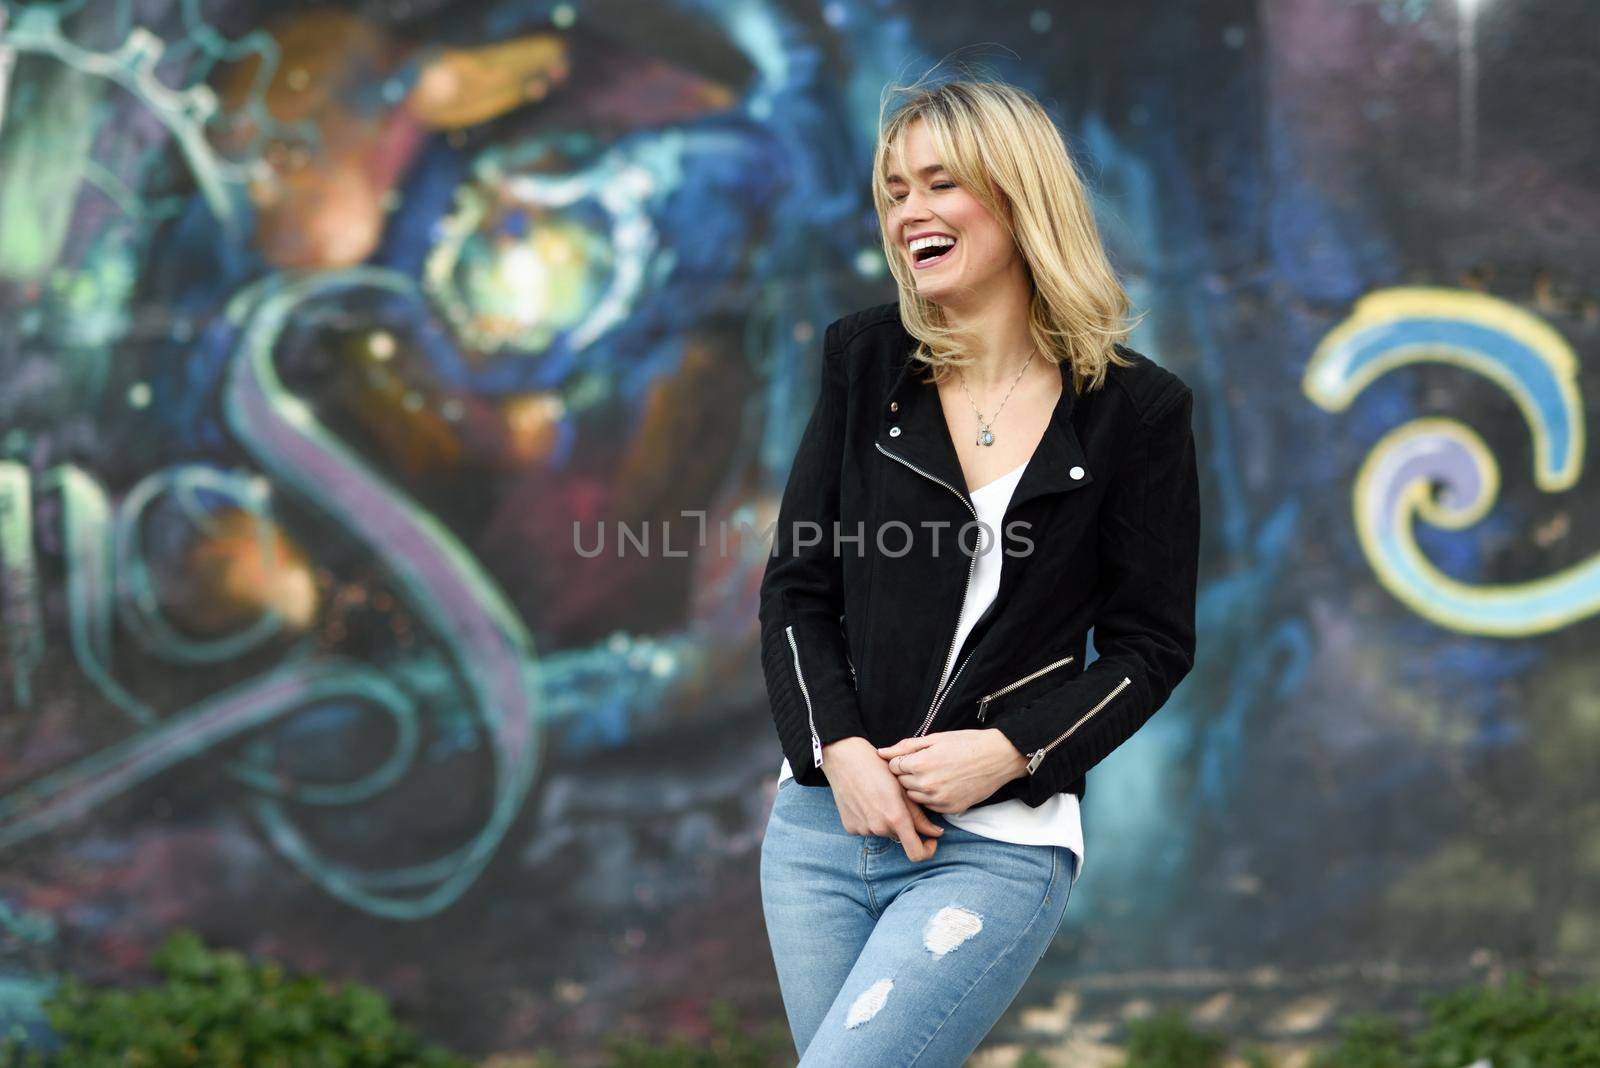 Funny blonde woman laughing in urban background. Young girl wearing black zipper jacket and blue jeans trousers standing in the street. Pretty female with straight hair hairstyle and blue eyes.